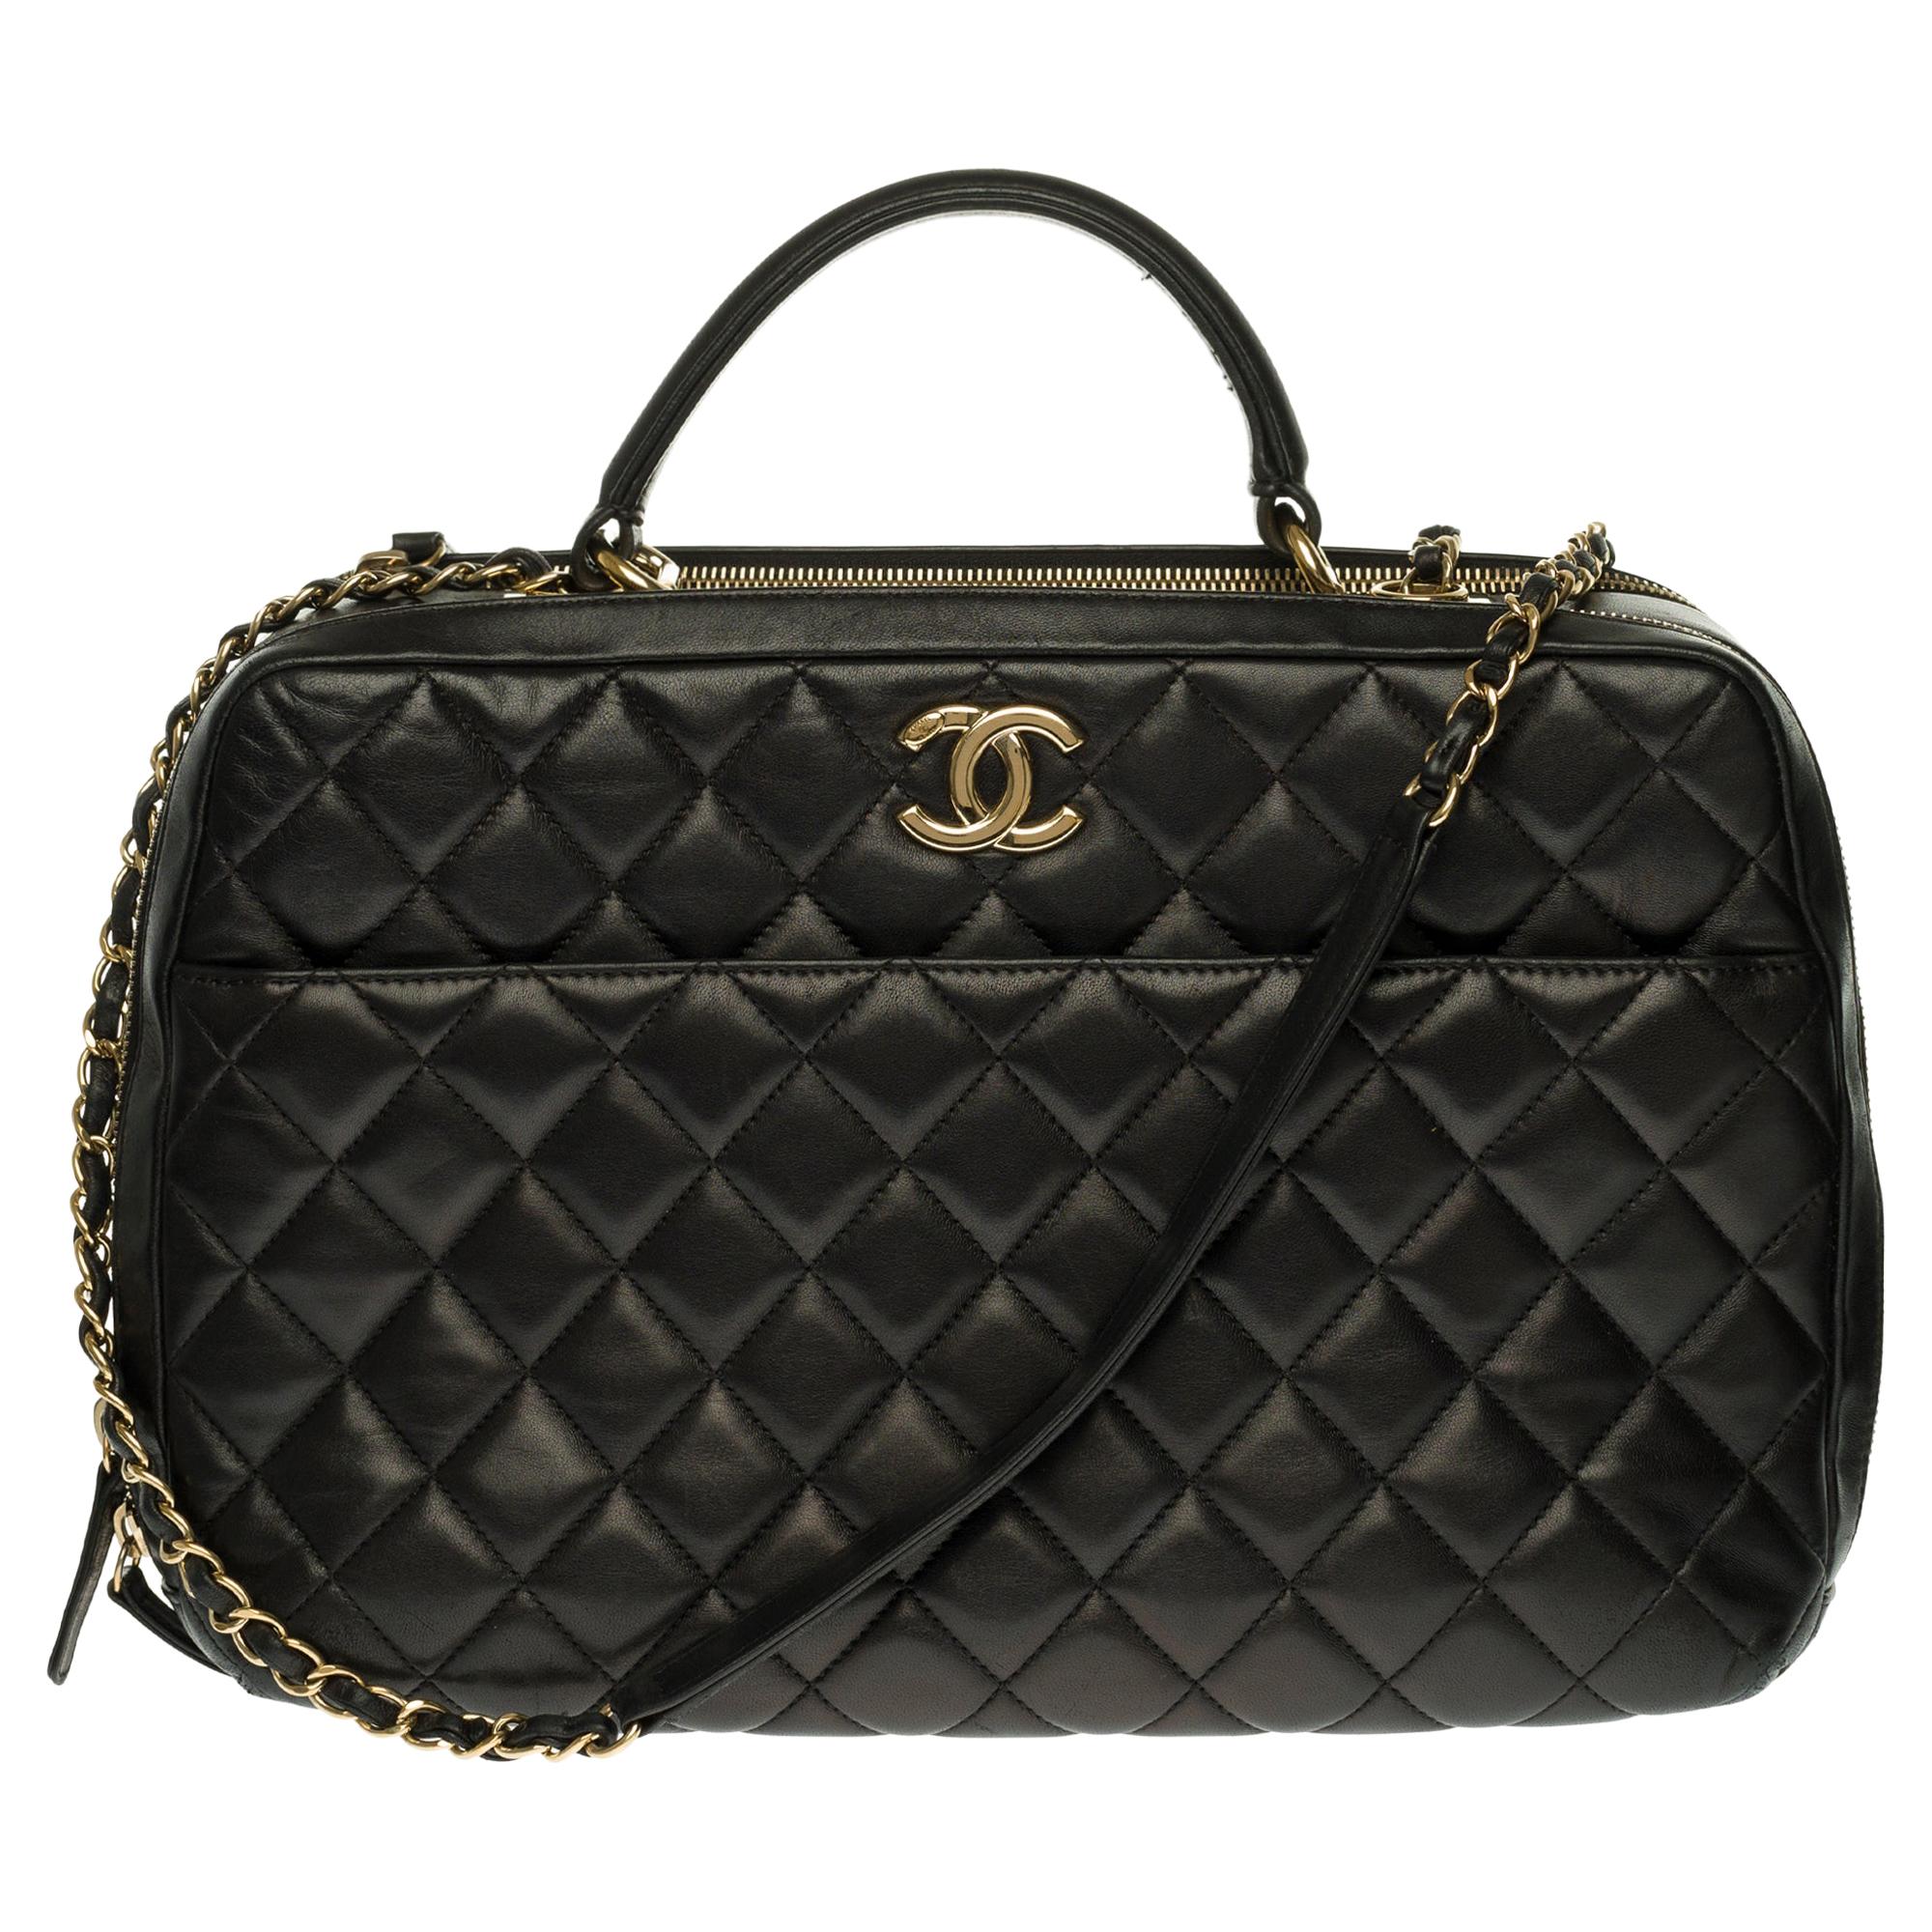 Amazing Chanel CC Vanity Case Bag with gold hardware